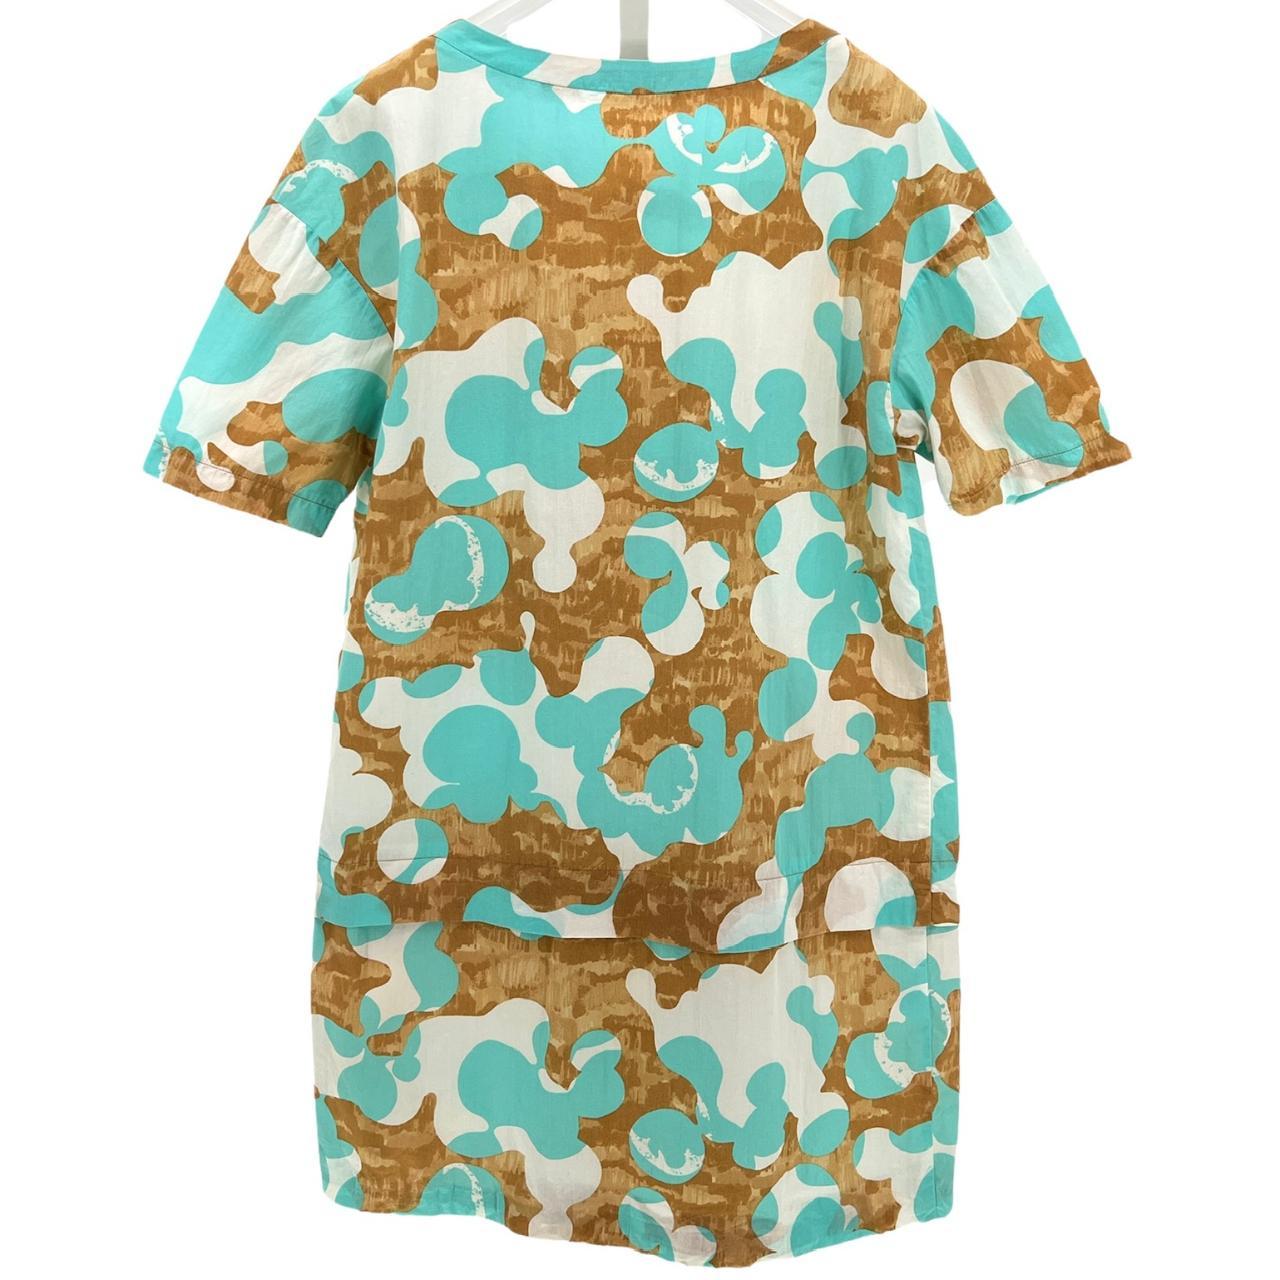 Product Image 3 - See by Chloé Shift Dress.

Pop-arty,